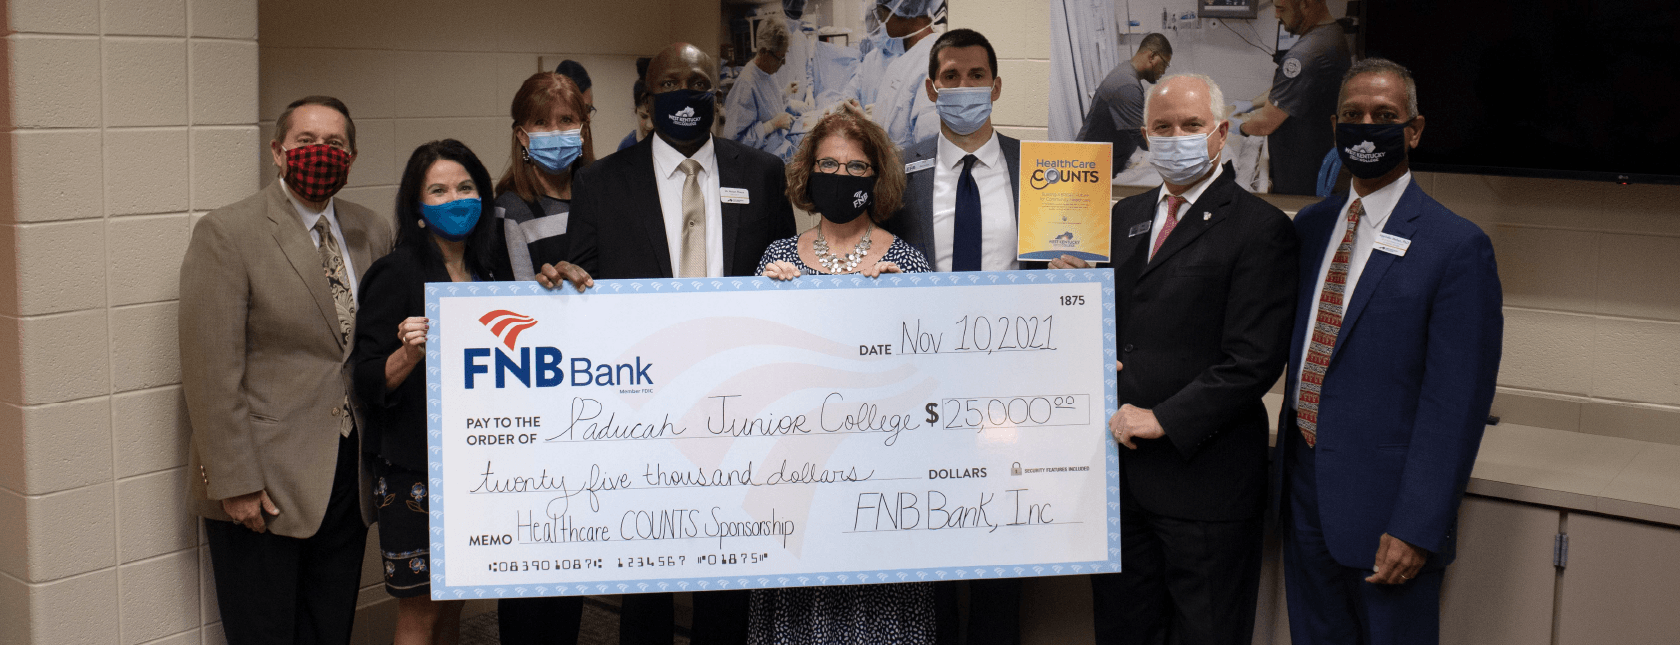 FNB Makes $25,000 Investment to WKCTC's Healthcare Counts Campaign